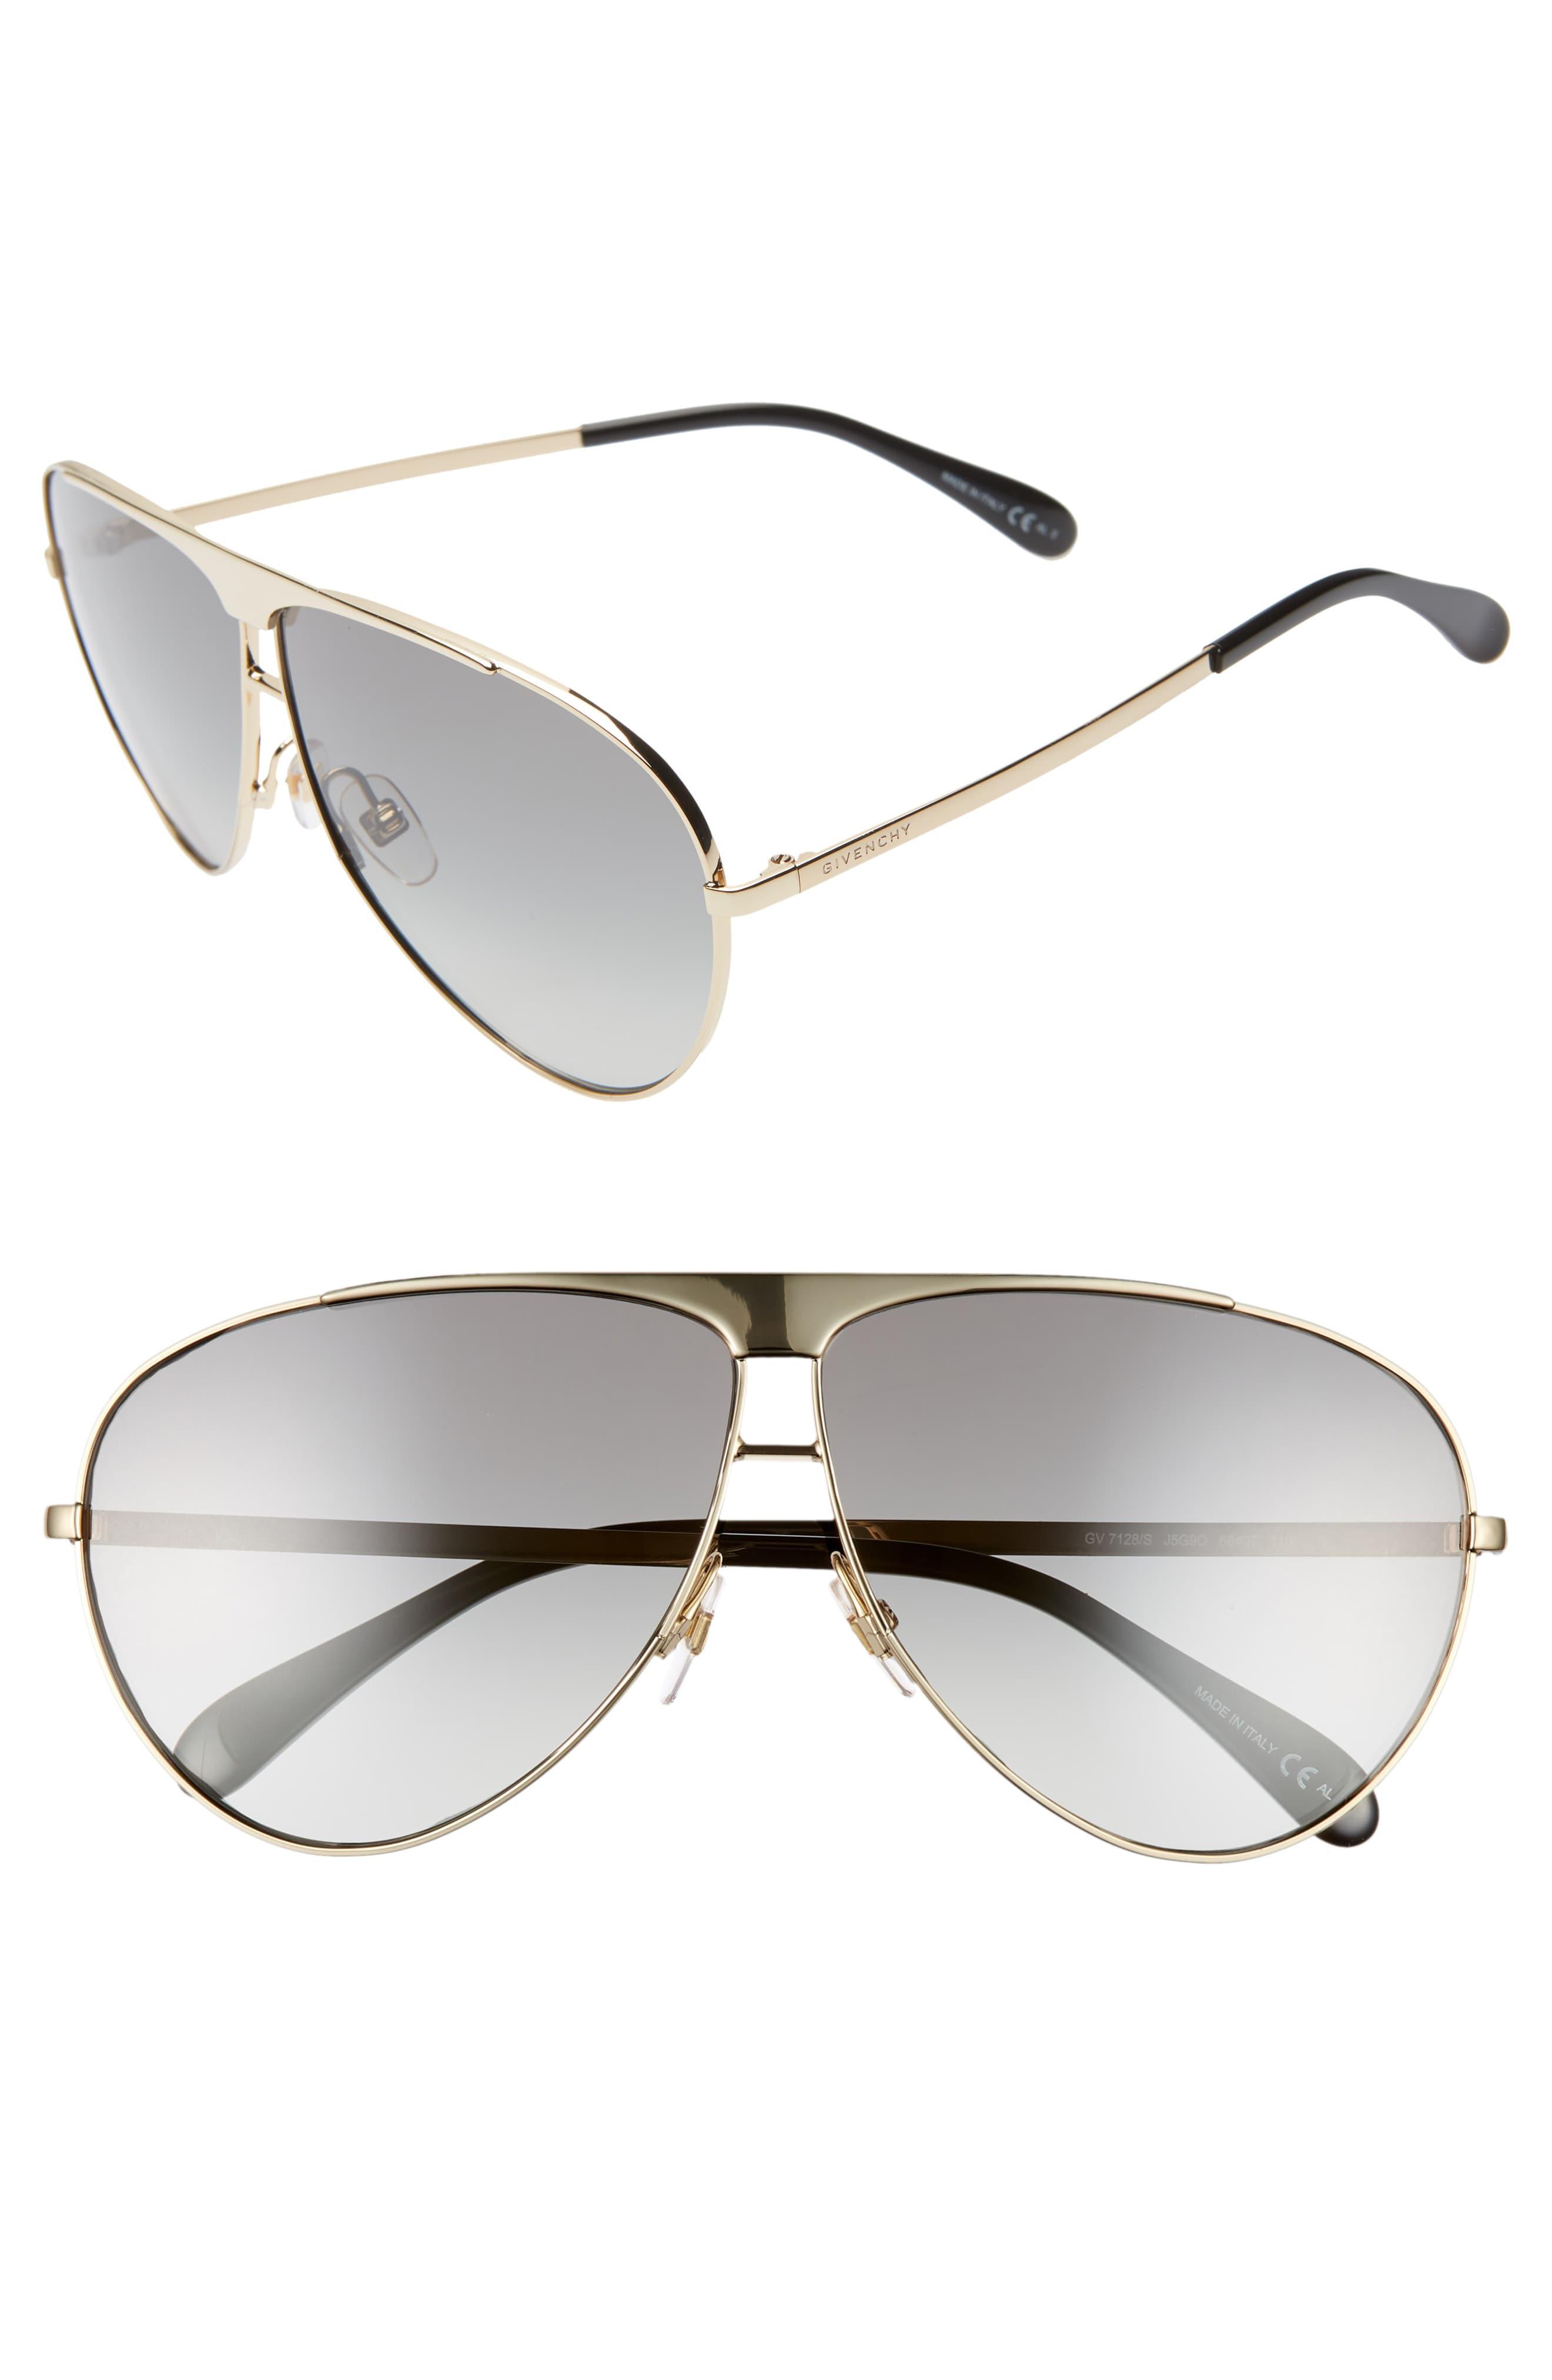 Givenchy 66mm Aviator Sunglasses - Lyst